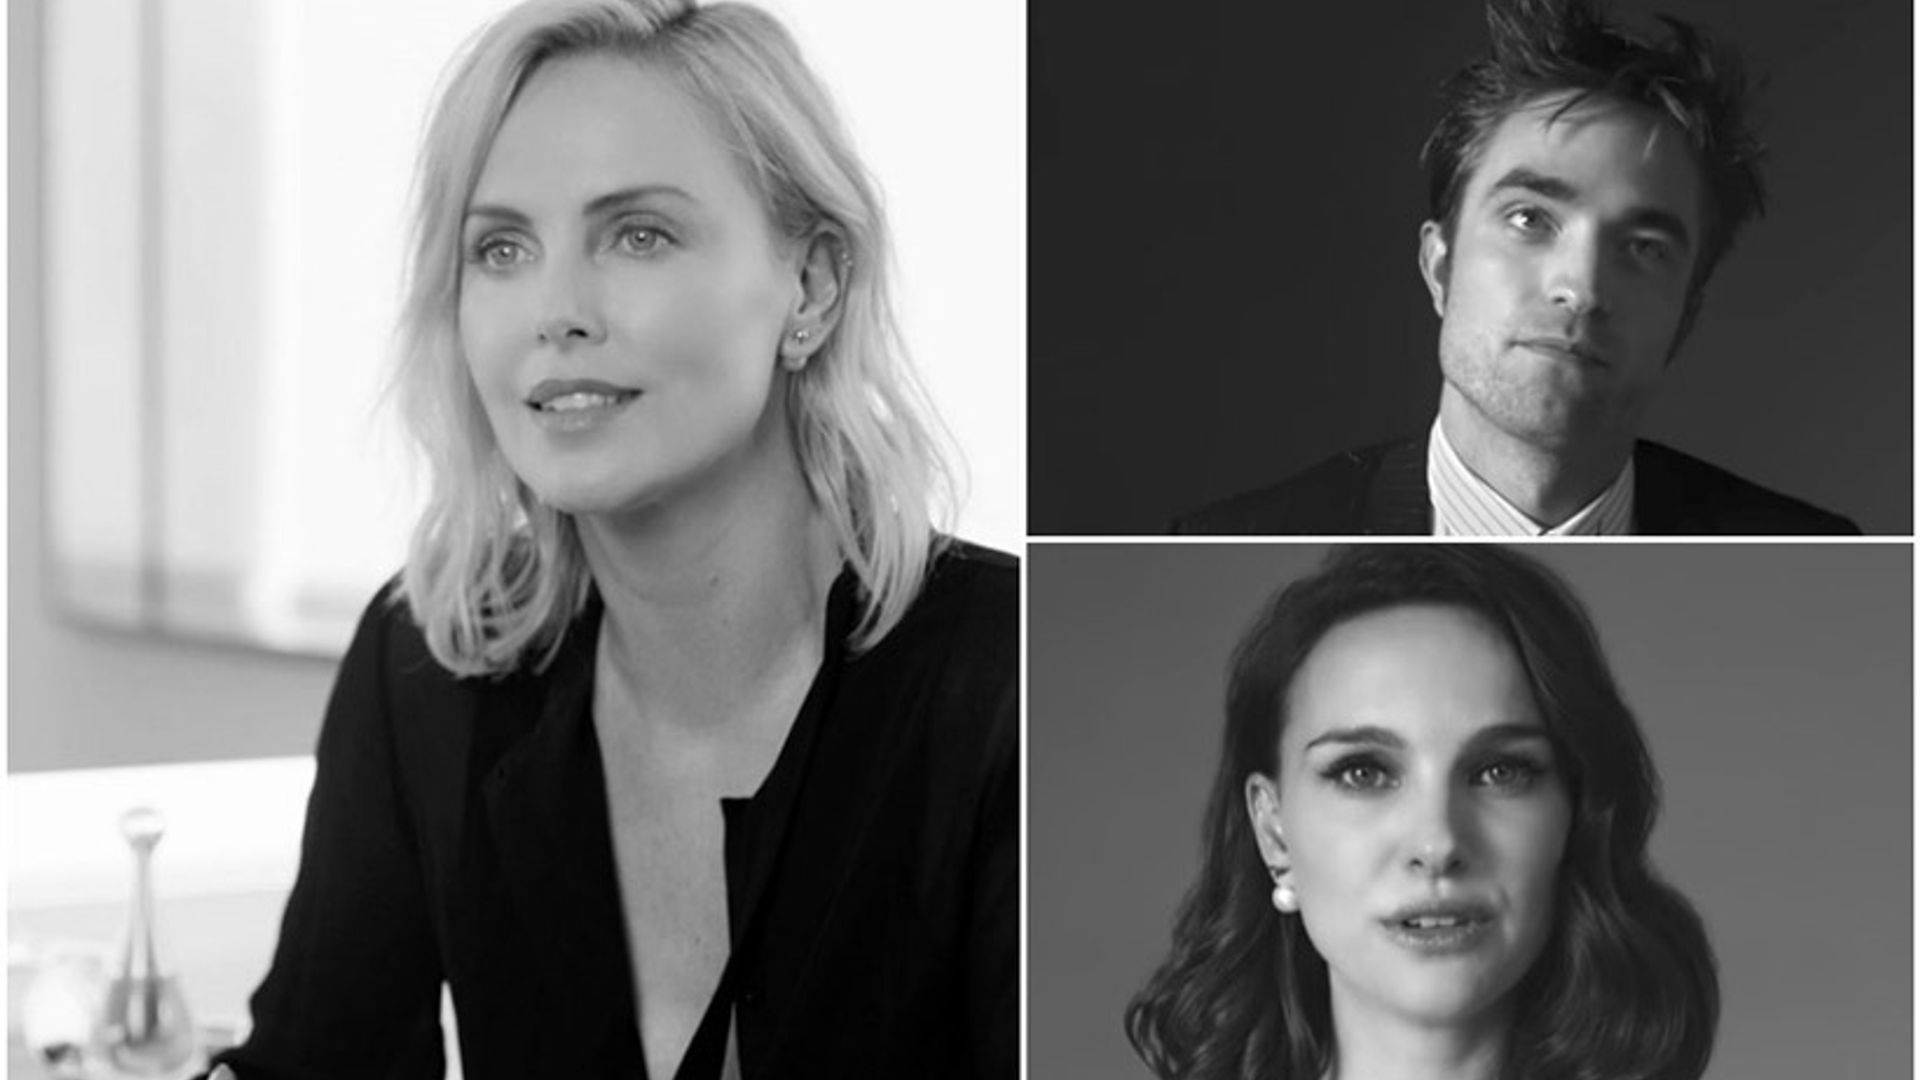 Find out what Robert Pattinson, Charlize Theron and more stars would do for love